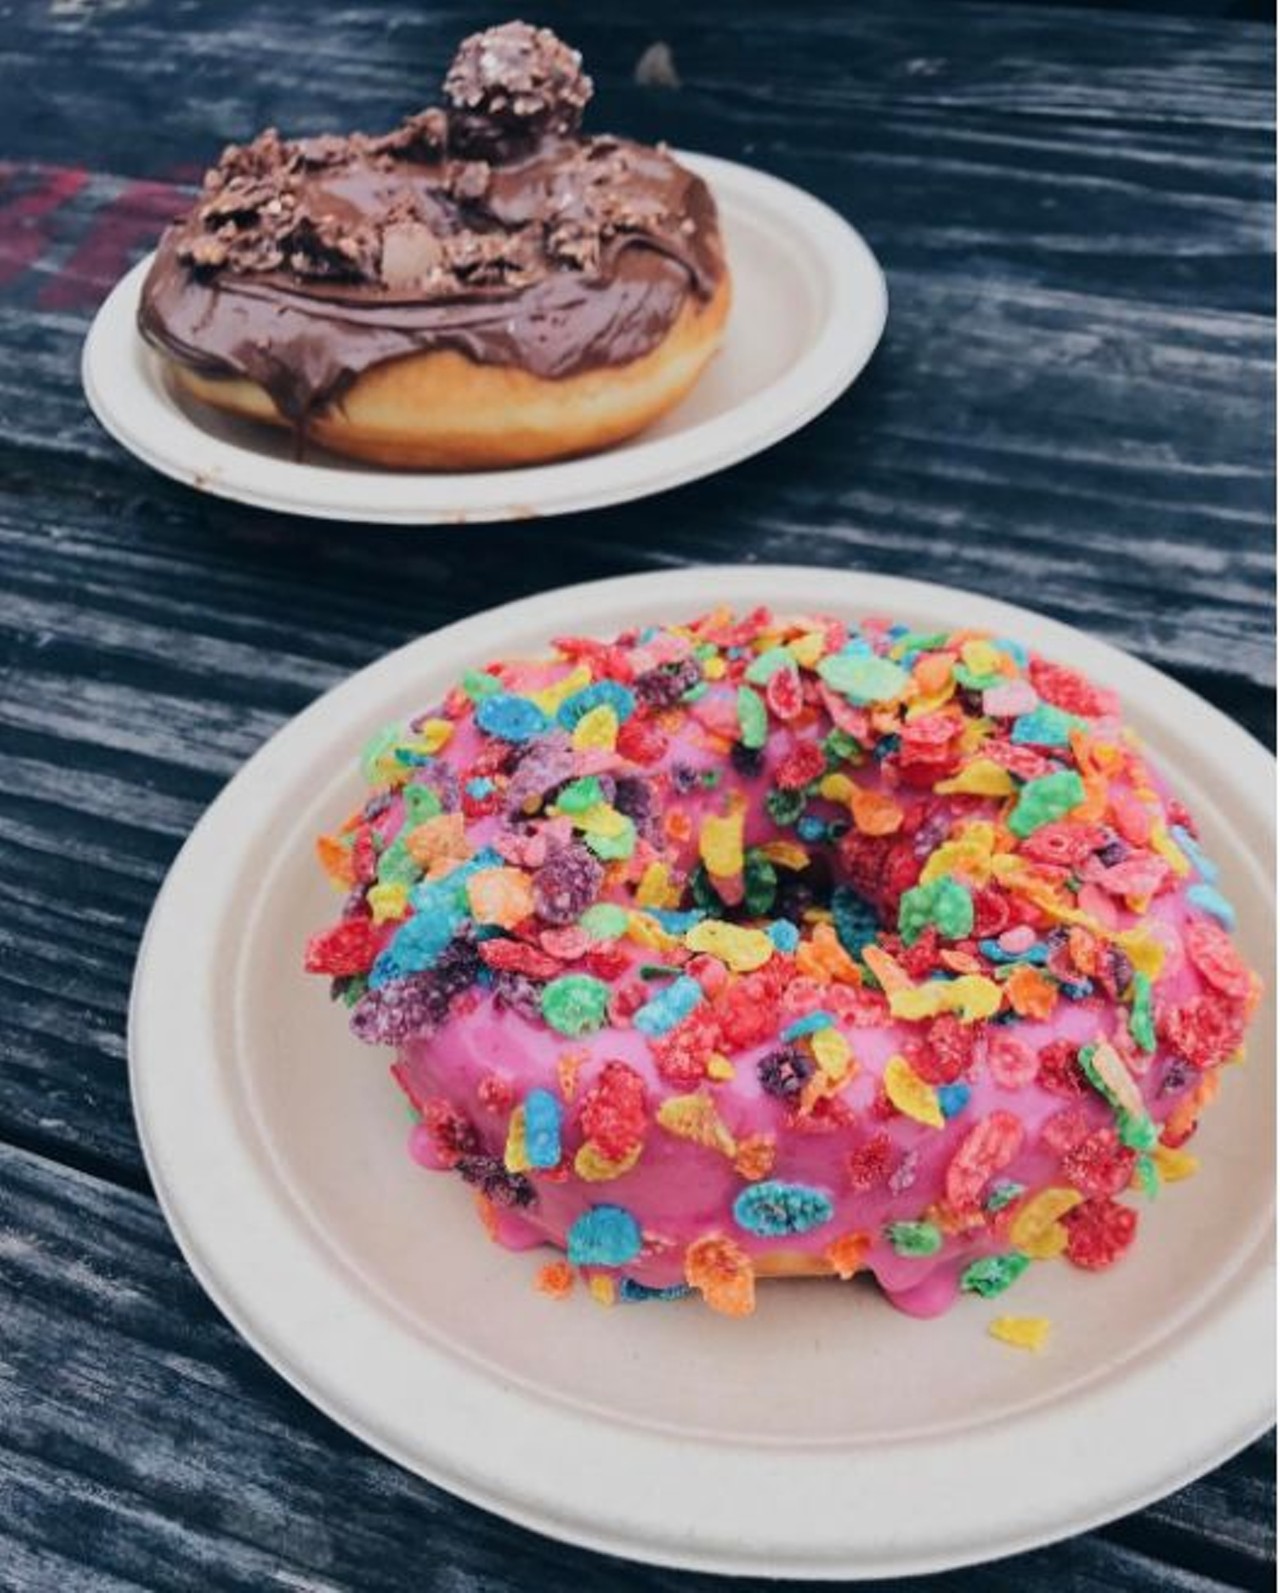 The Art of Donut
3428 N St Mary's St., artofdonut.com
The Art of Donut is taking these breakfast sweets to a whole new level with fruity pebbles, Nutella with Ferreror Rocher and fried chicken doughnuts. You might want to be prepared to burn off the extra calories, but be sure you indulge in these treats to the fullest. 
Photo via Instagram, katiedellenback